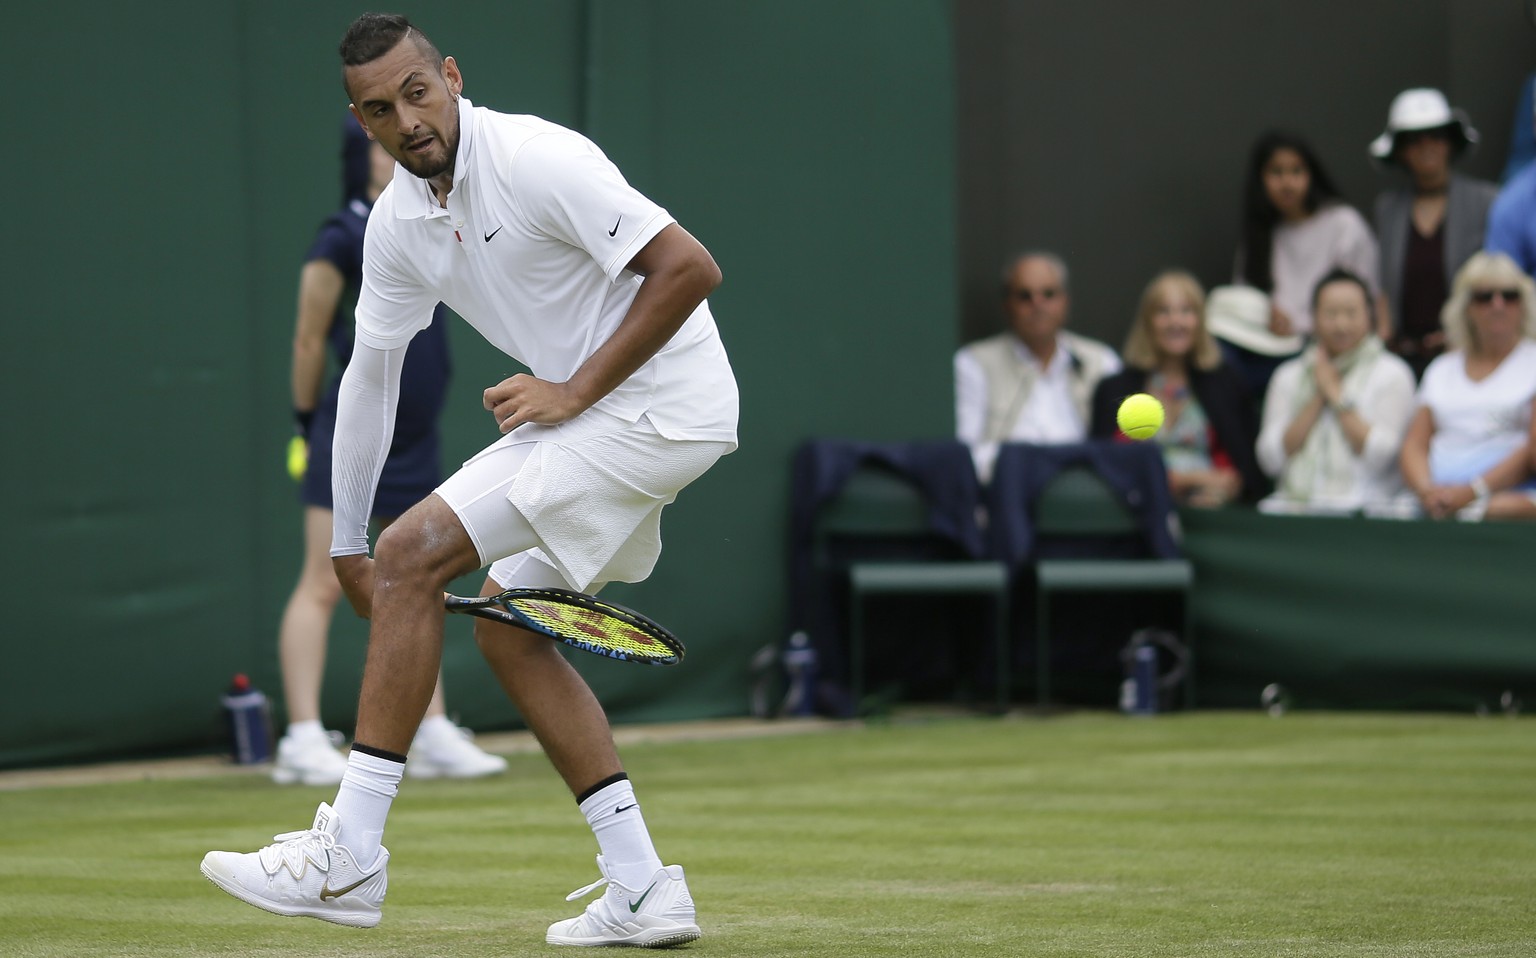 Australia&#039;s Nick Kyrgios returns the ball from between his legs to Australia&#039;s Jordan Thompson in a Men&#039;s singles match during day two of the Wimbledon Tennis Championships in London, T ...